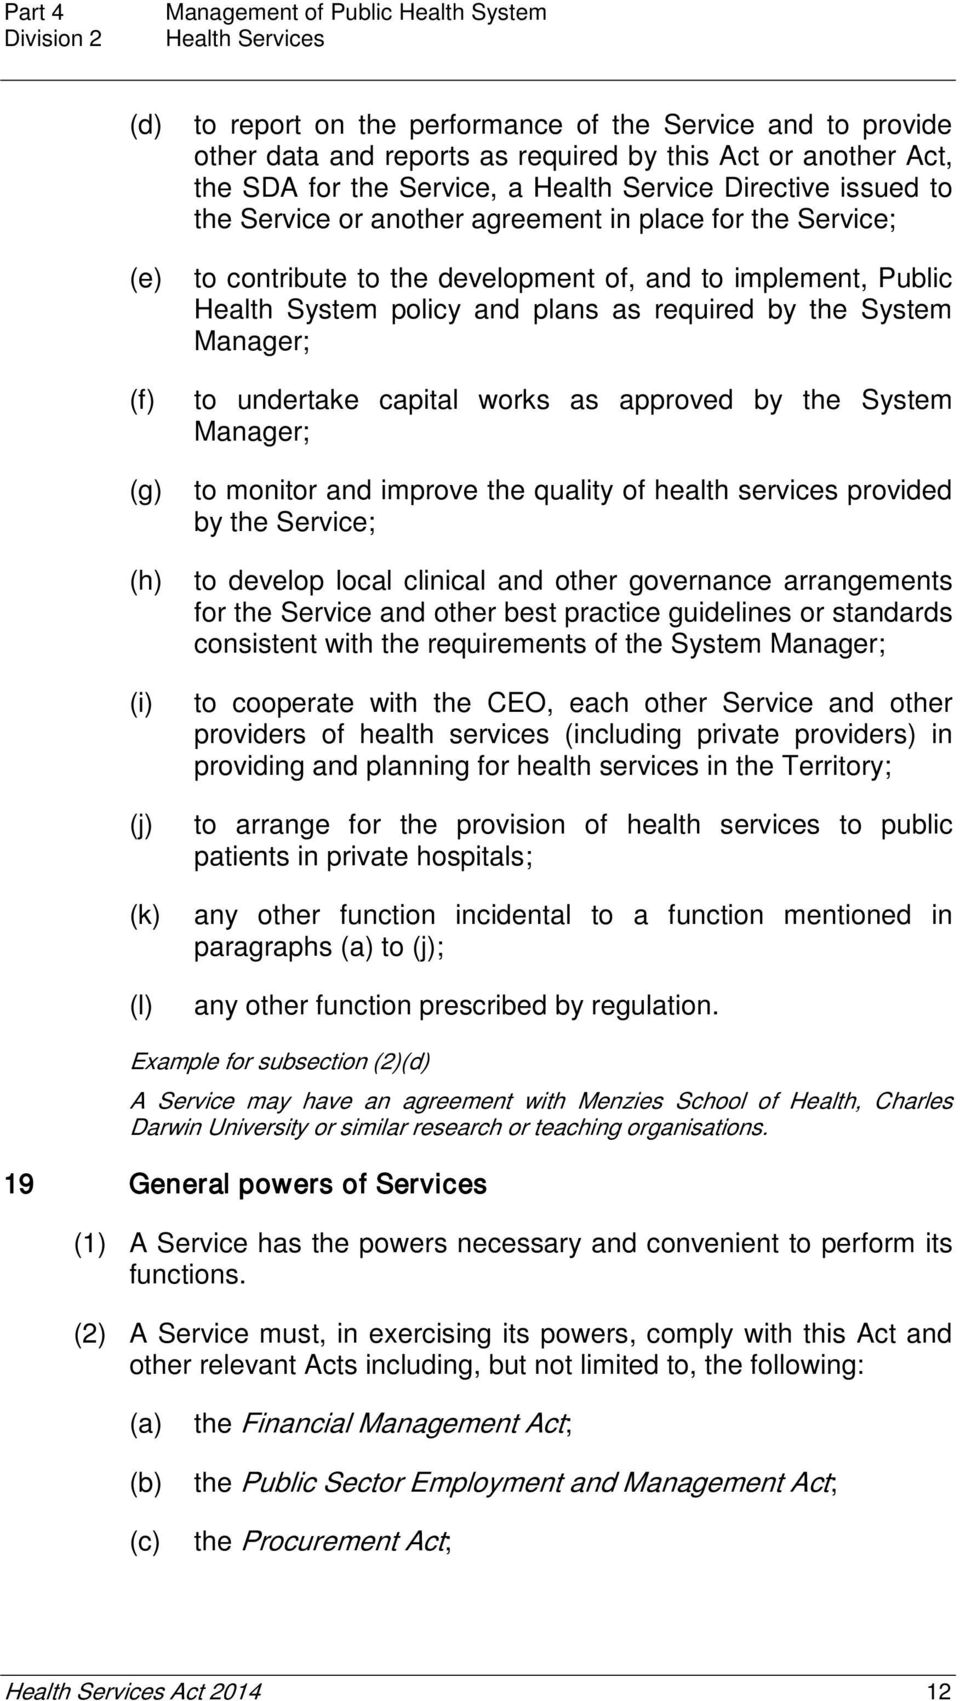 implement, Public Health System policy and plans as required by the System Manager; to undertake capital works as approved by the System Manager; to monitor and improve the quality of health services